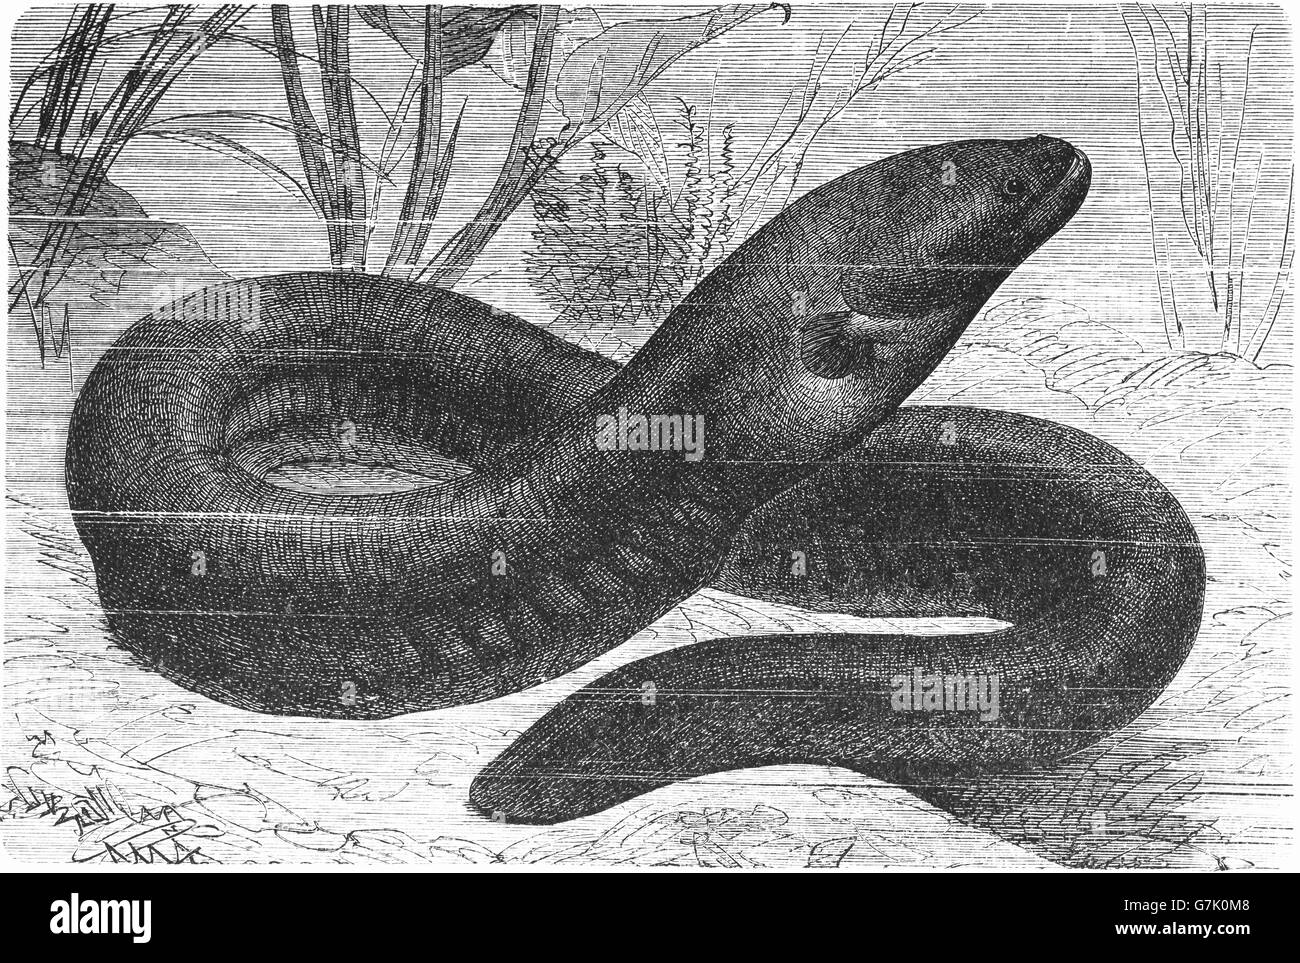 Electric eel, Electrophorus electricus, illustration from book dated 1904 Stock Photo